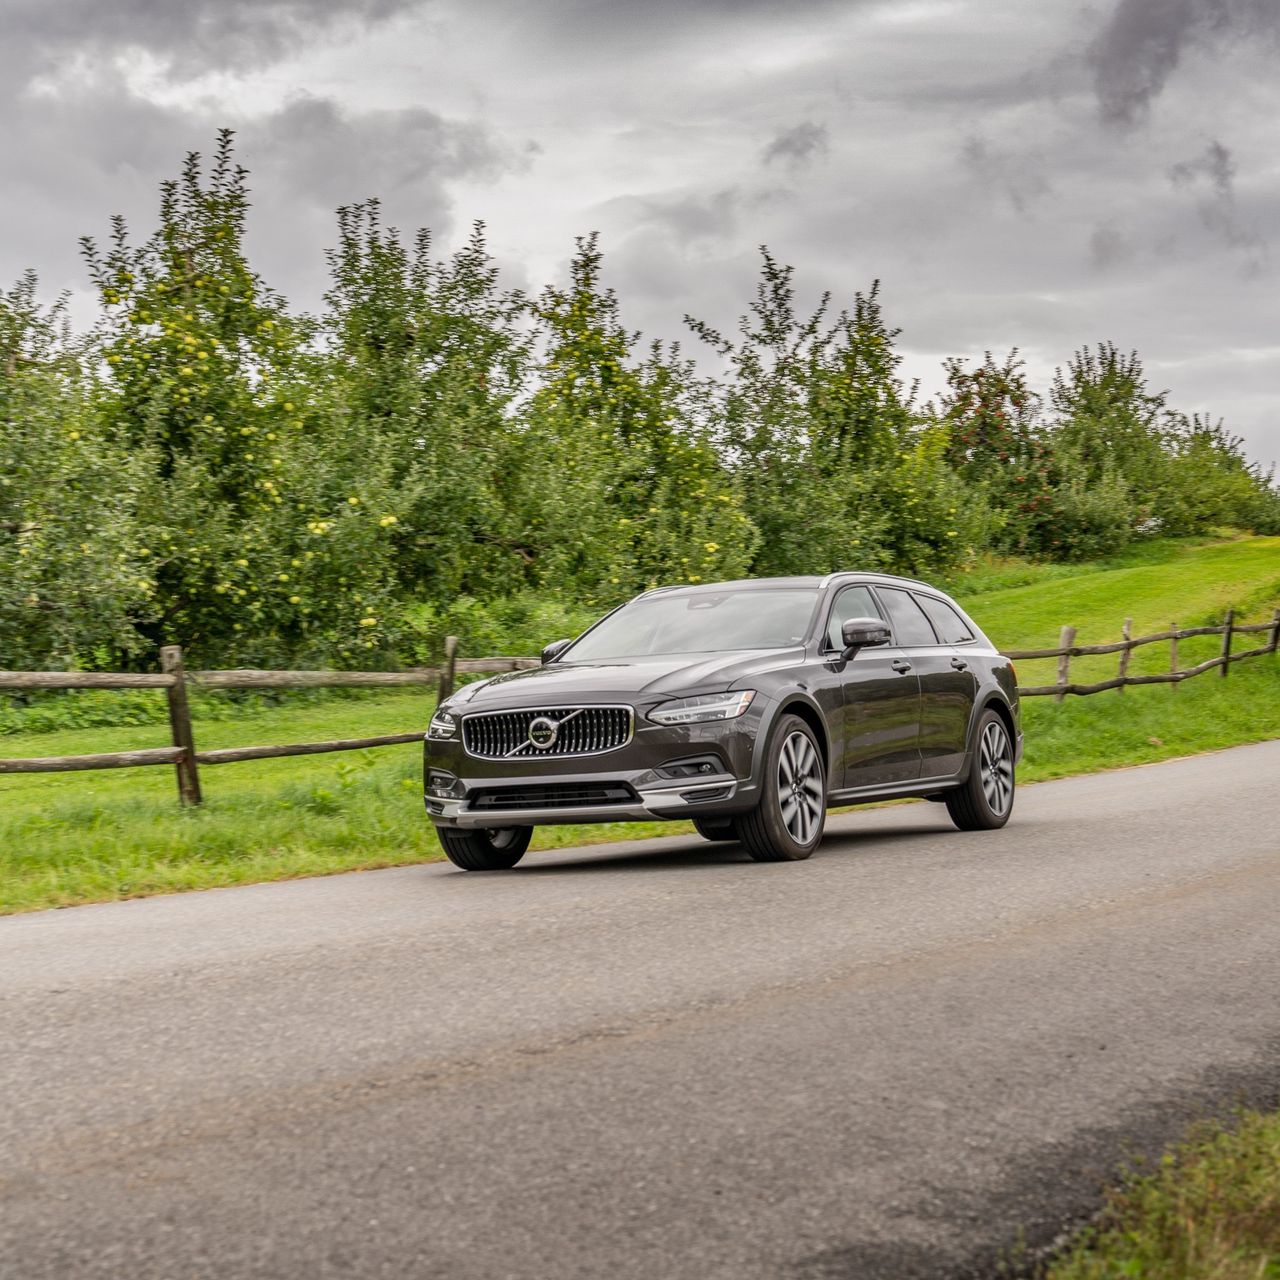 2022 Volvo V90 Cross Country B6: Get It While You Can - WSJ